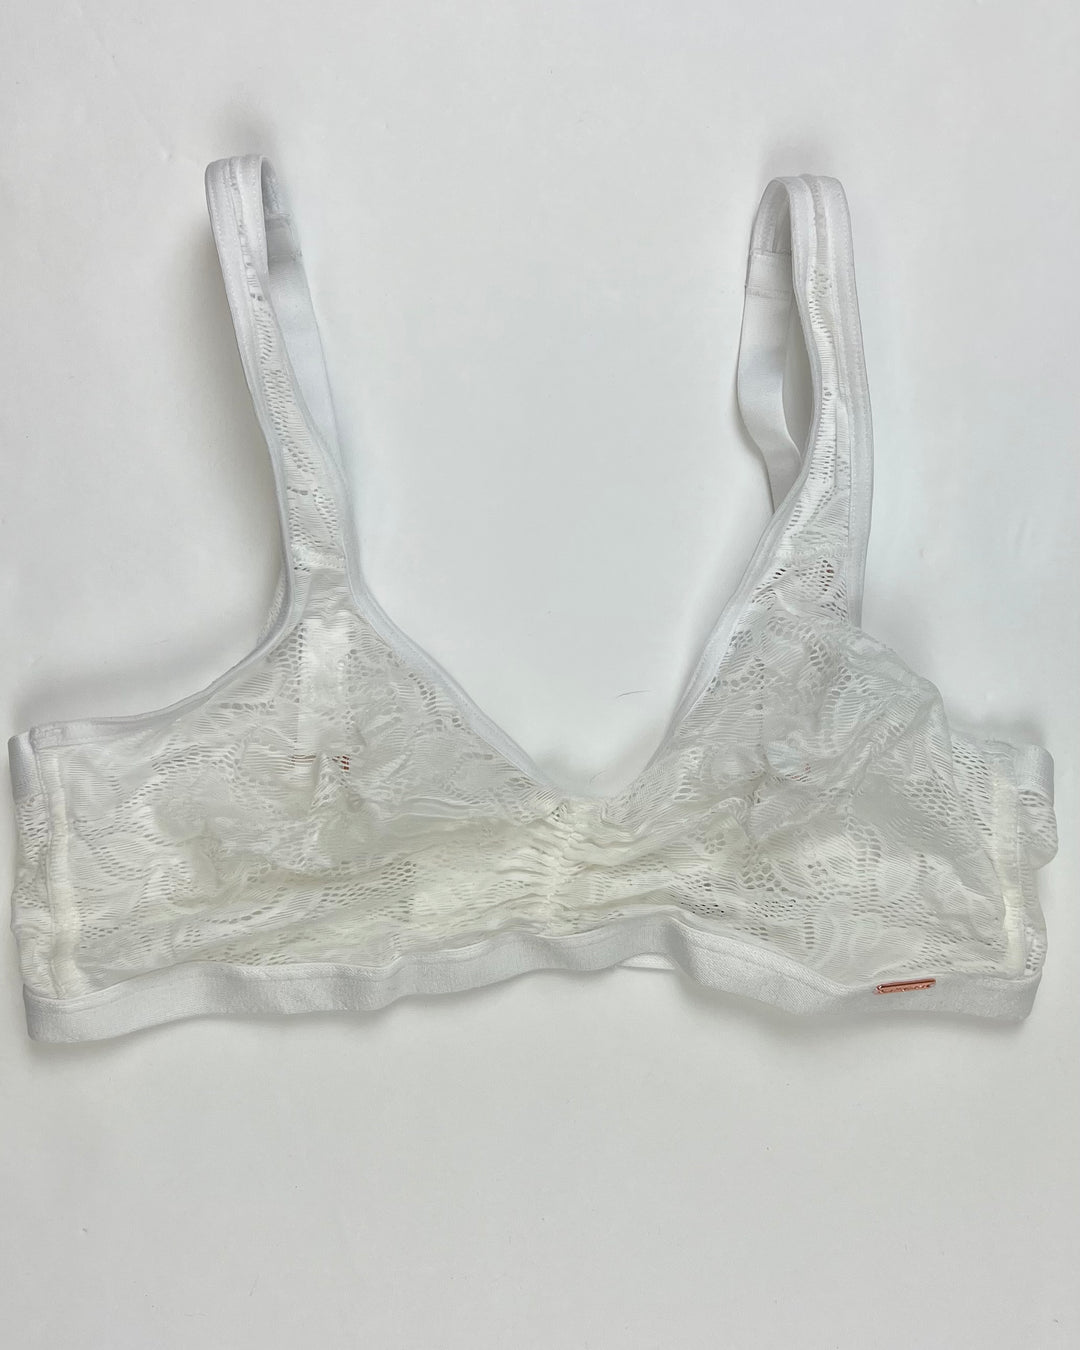 White Lace Bralette - 34C and 34D